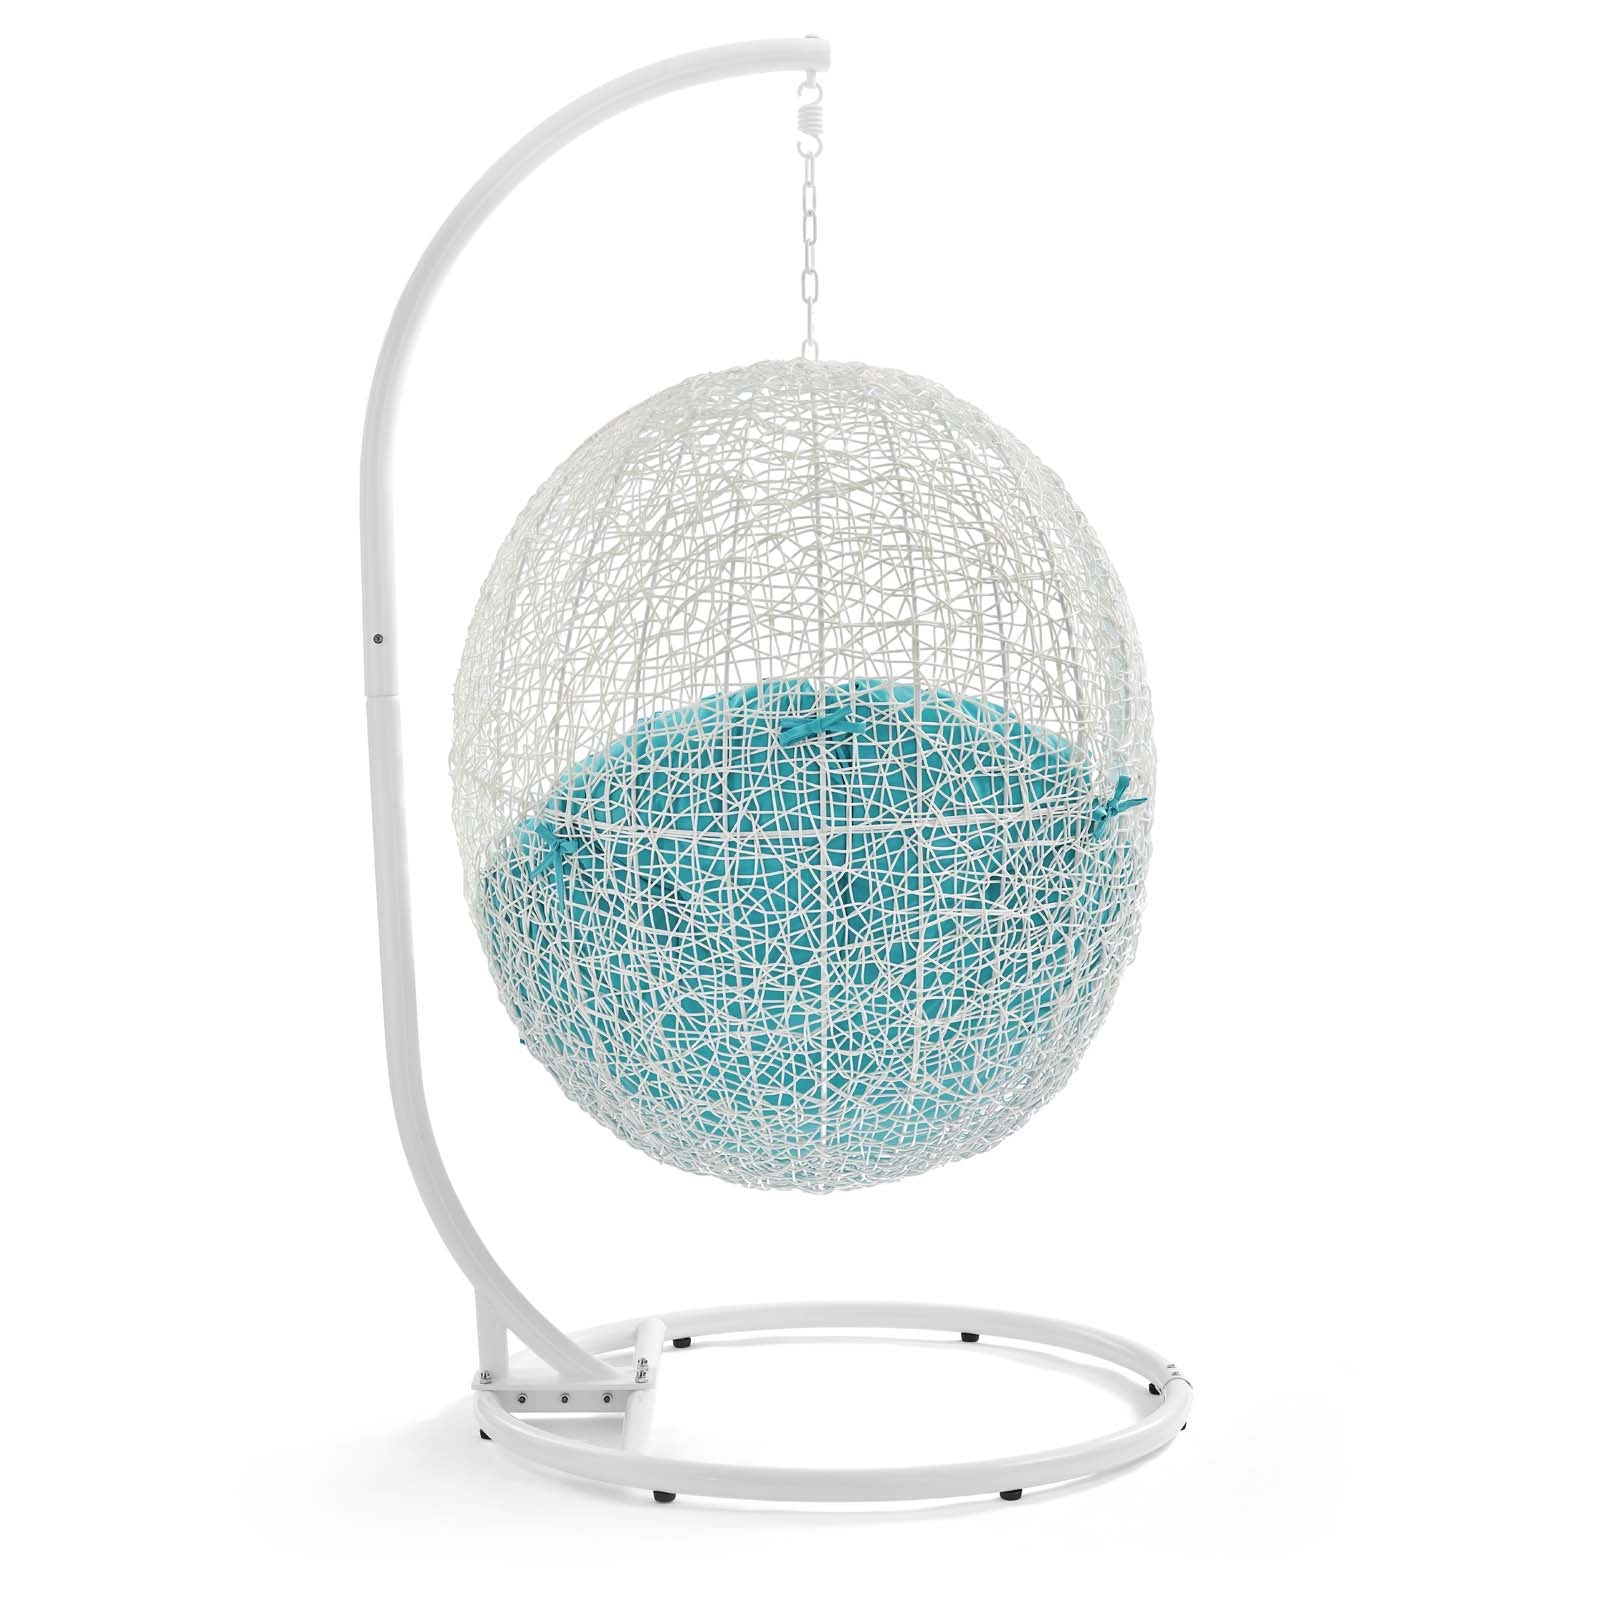 Modway Outdoor Swings - Hide Outdoor Patio Swing Chair With Stand White Turquoise